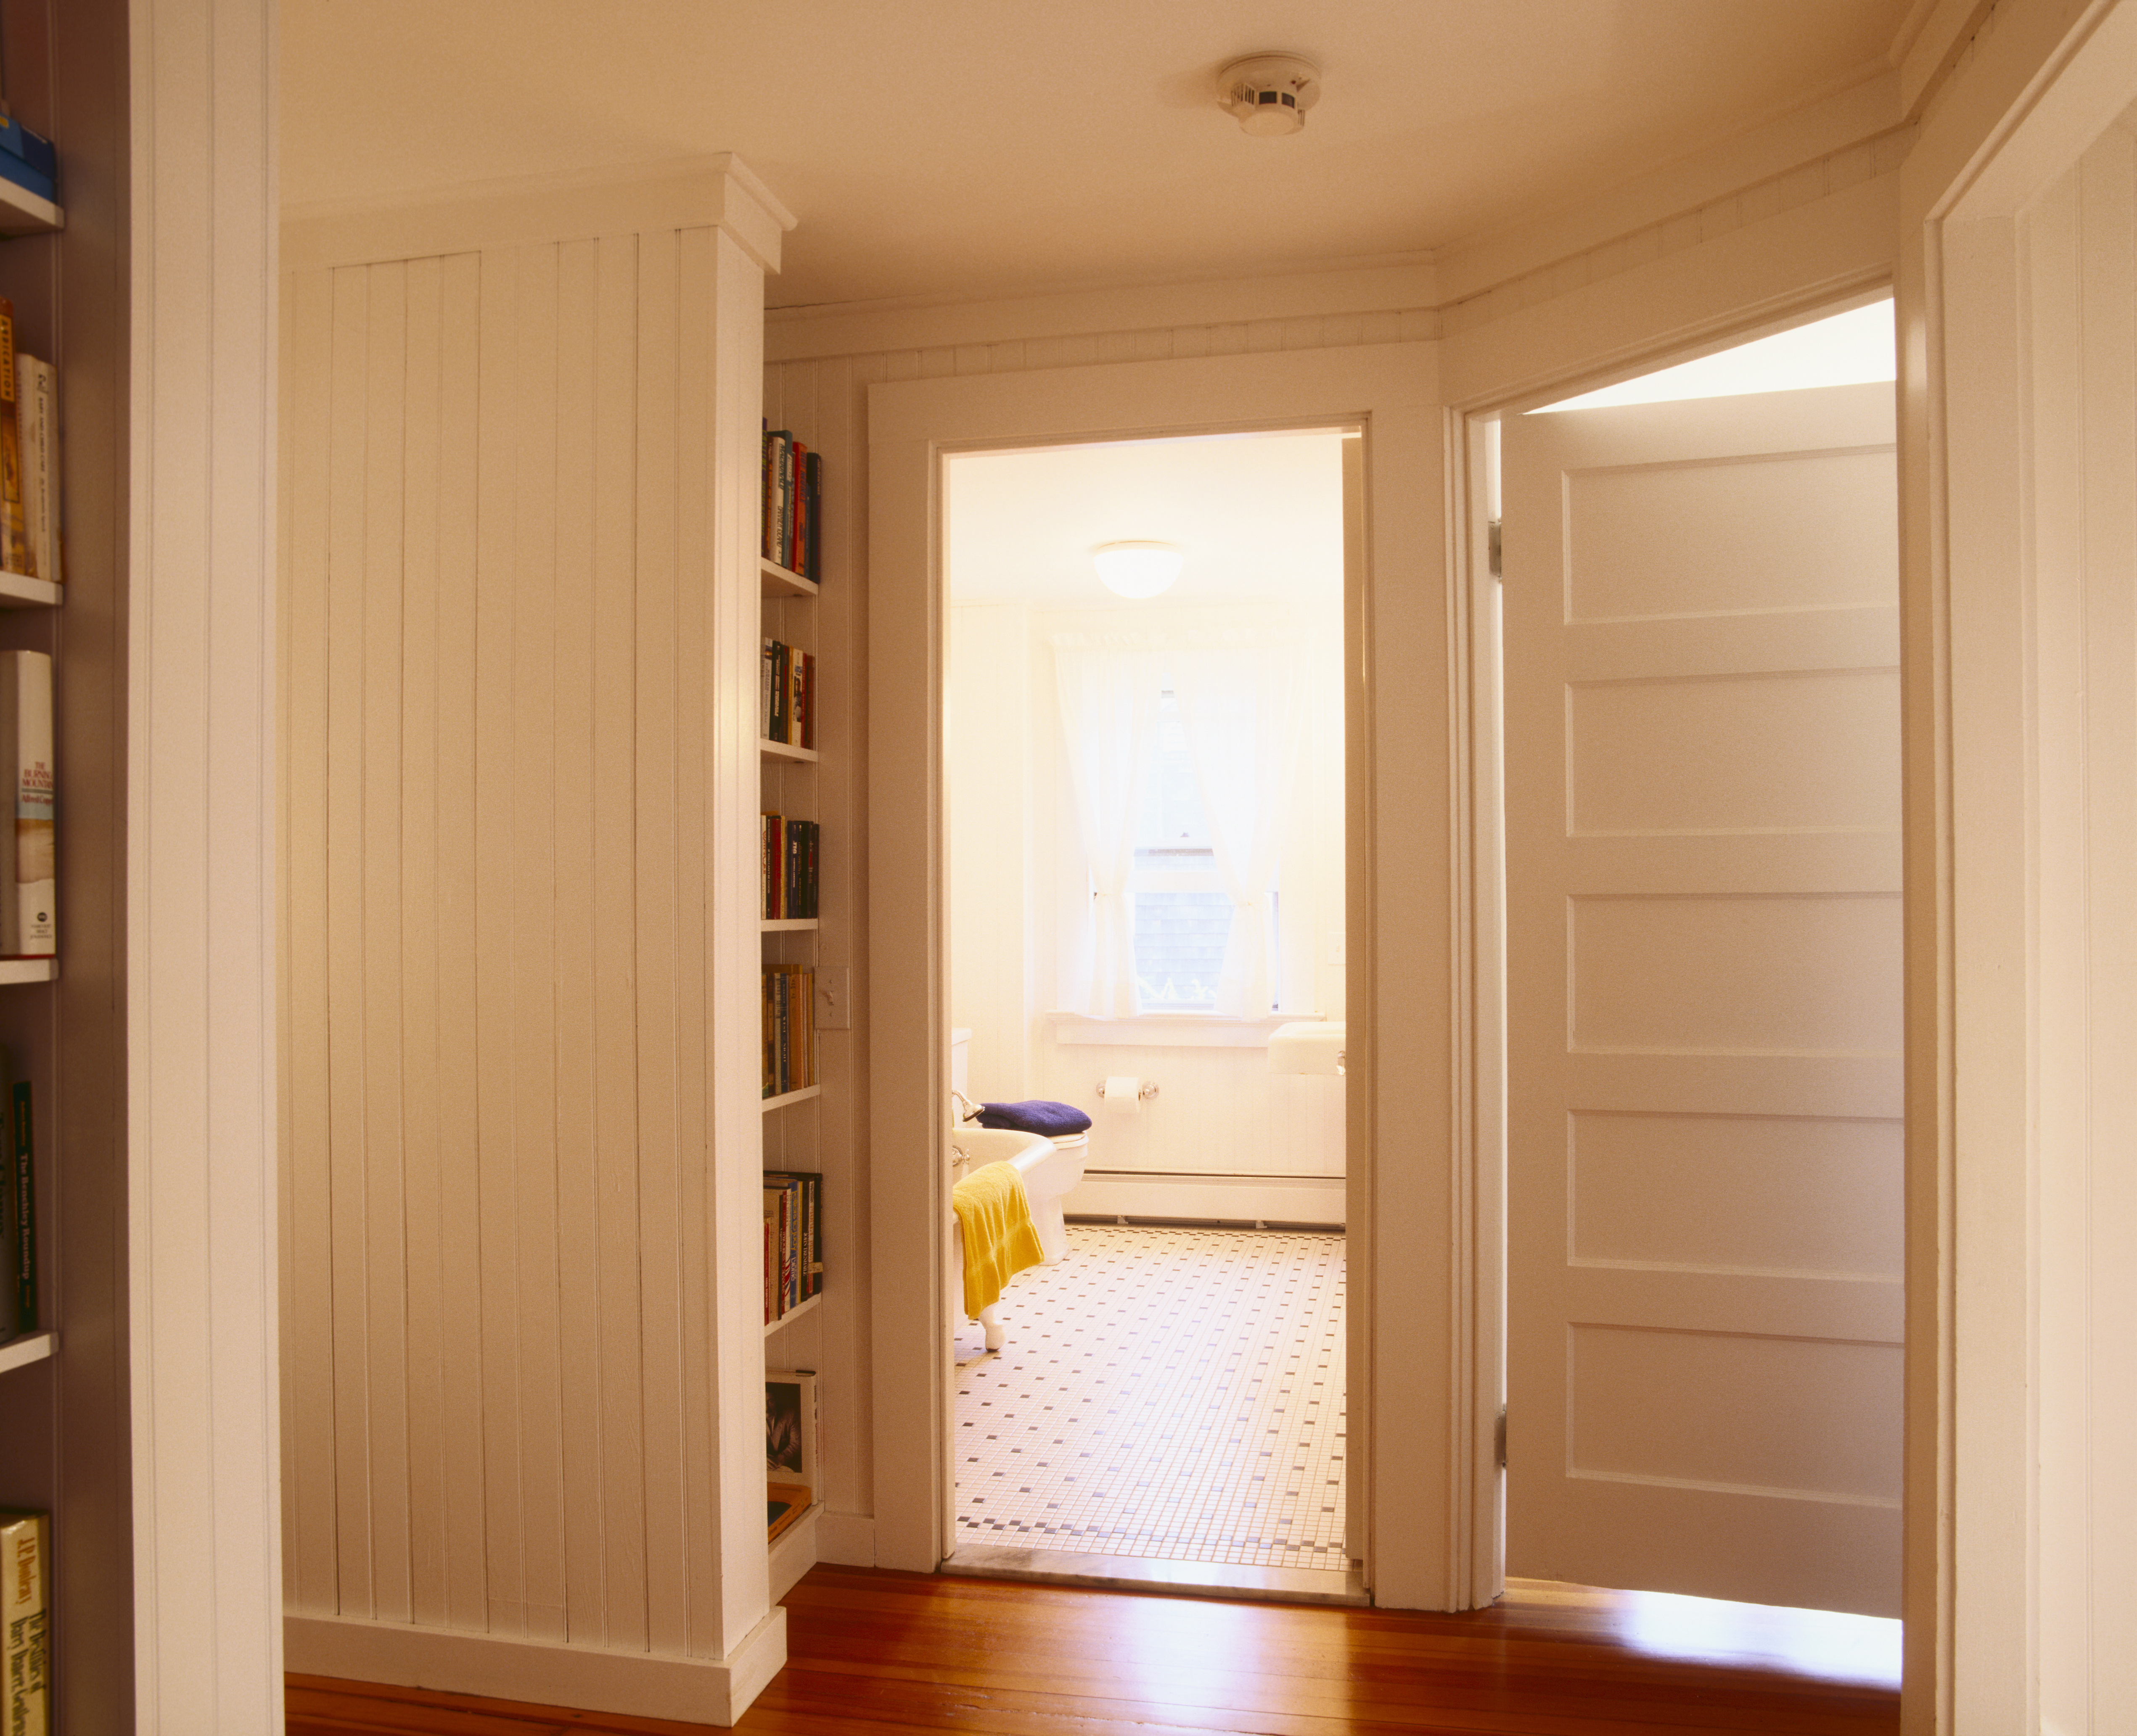 How to Repair a Door Frame: 5 Ways to Fix and Replace Jambs